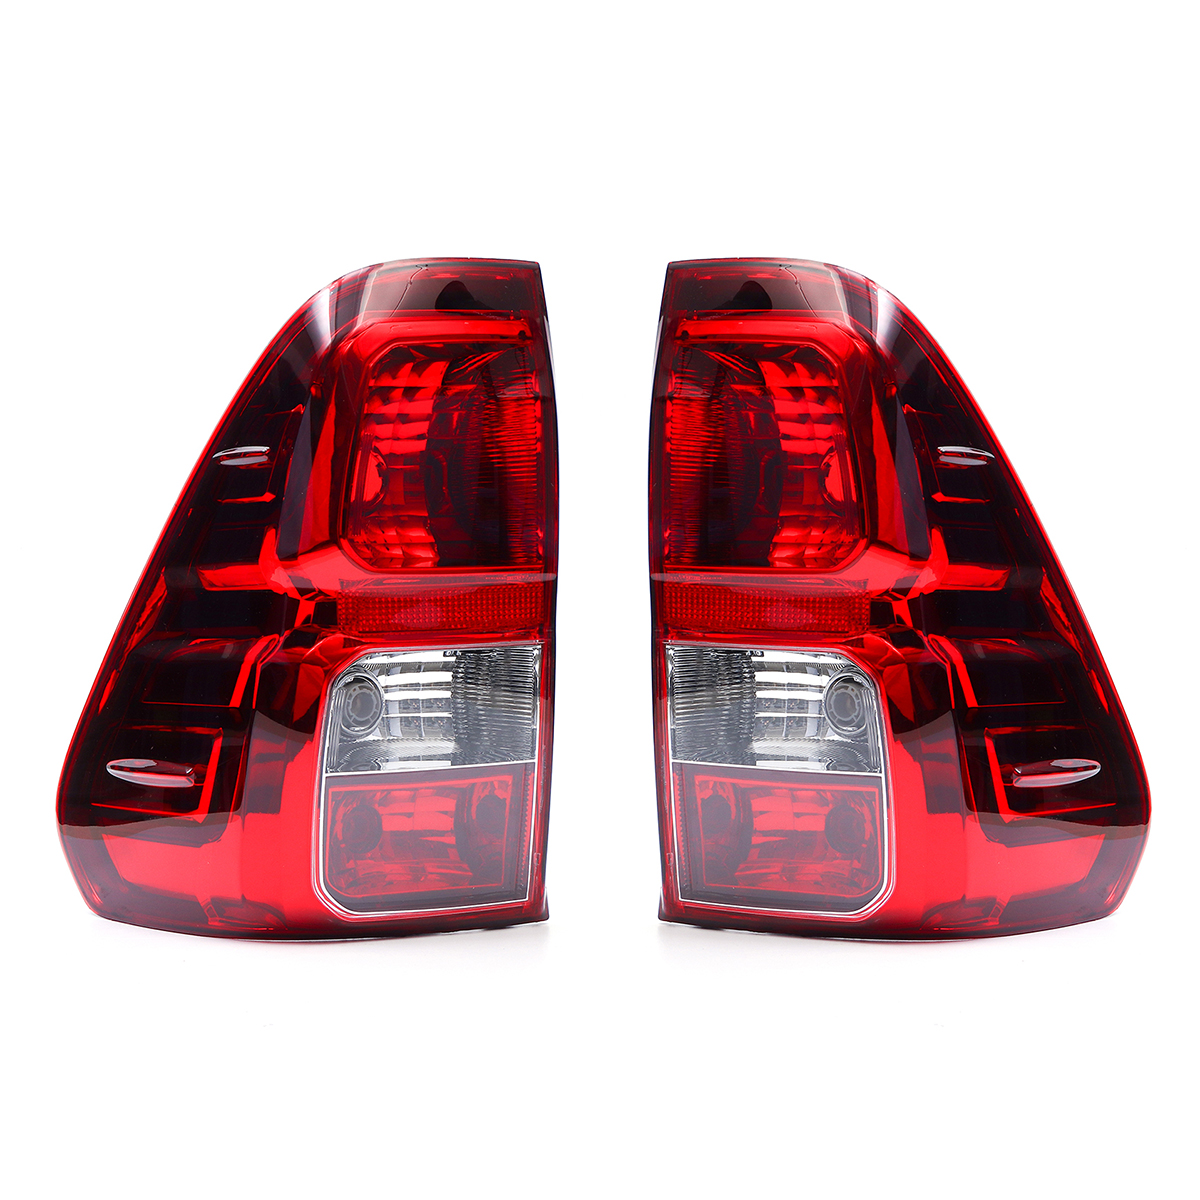 

Car Rear Left/Right Tail Light Brake Lamp Assembly without Bulb for Toyota Hilux Revo 2015-2018